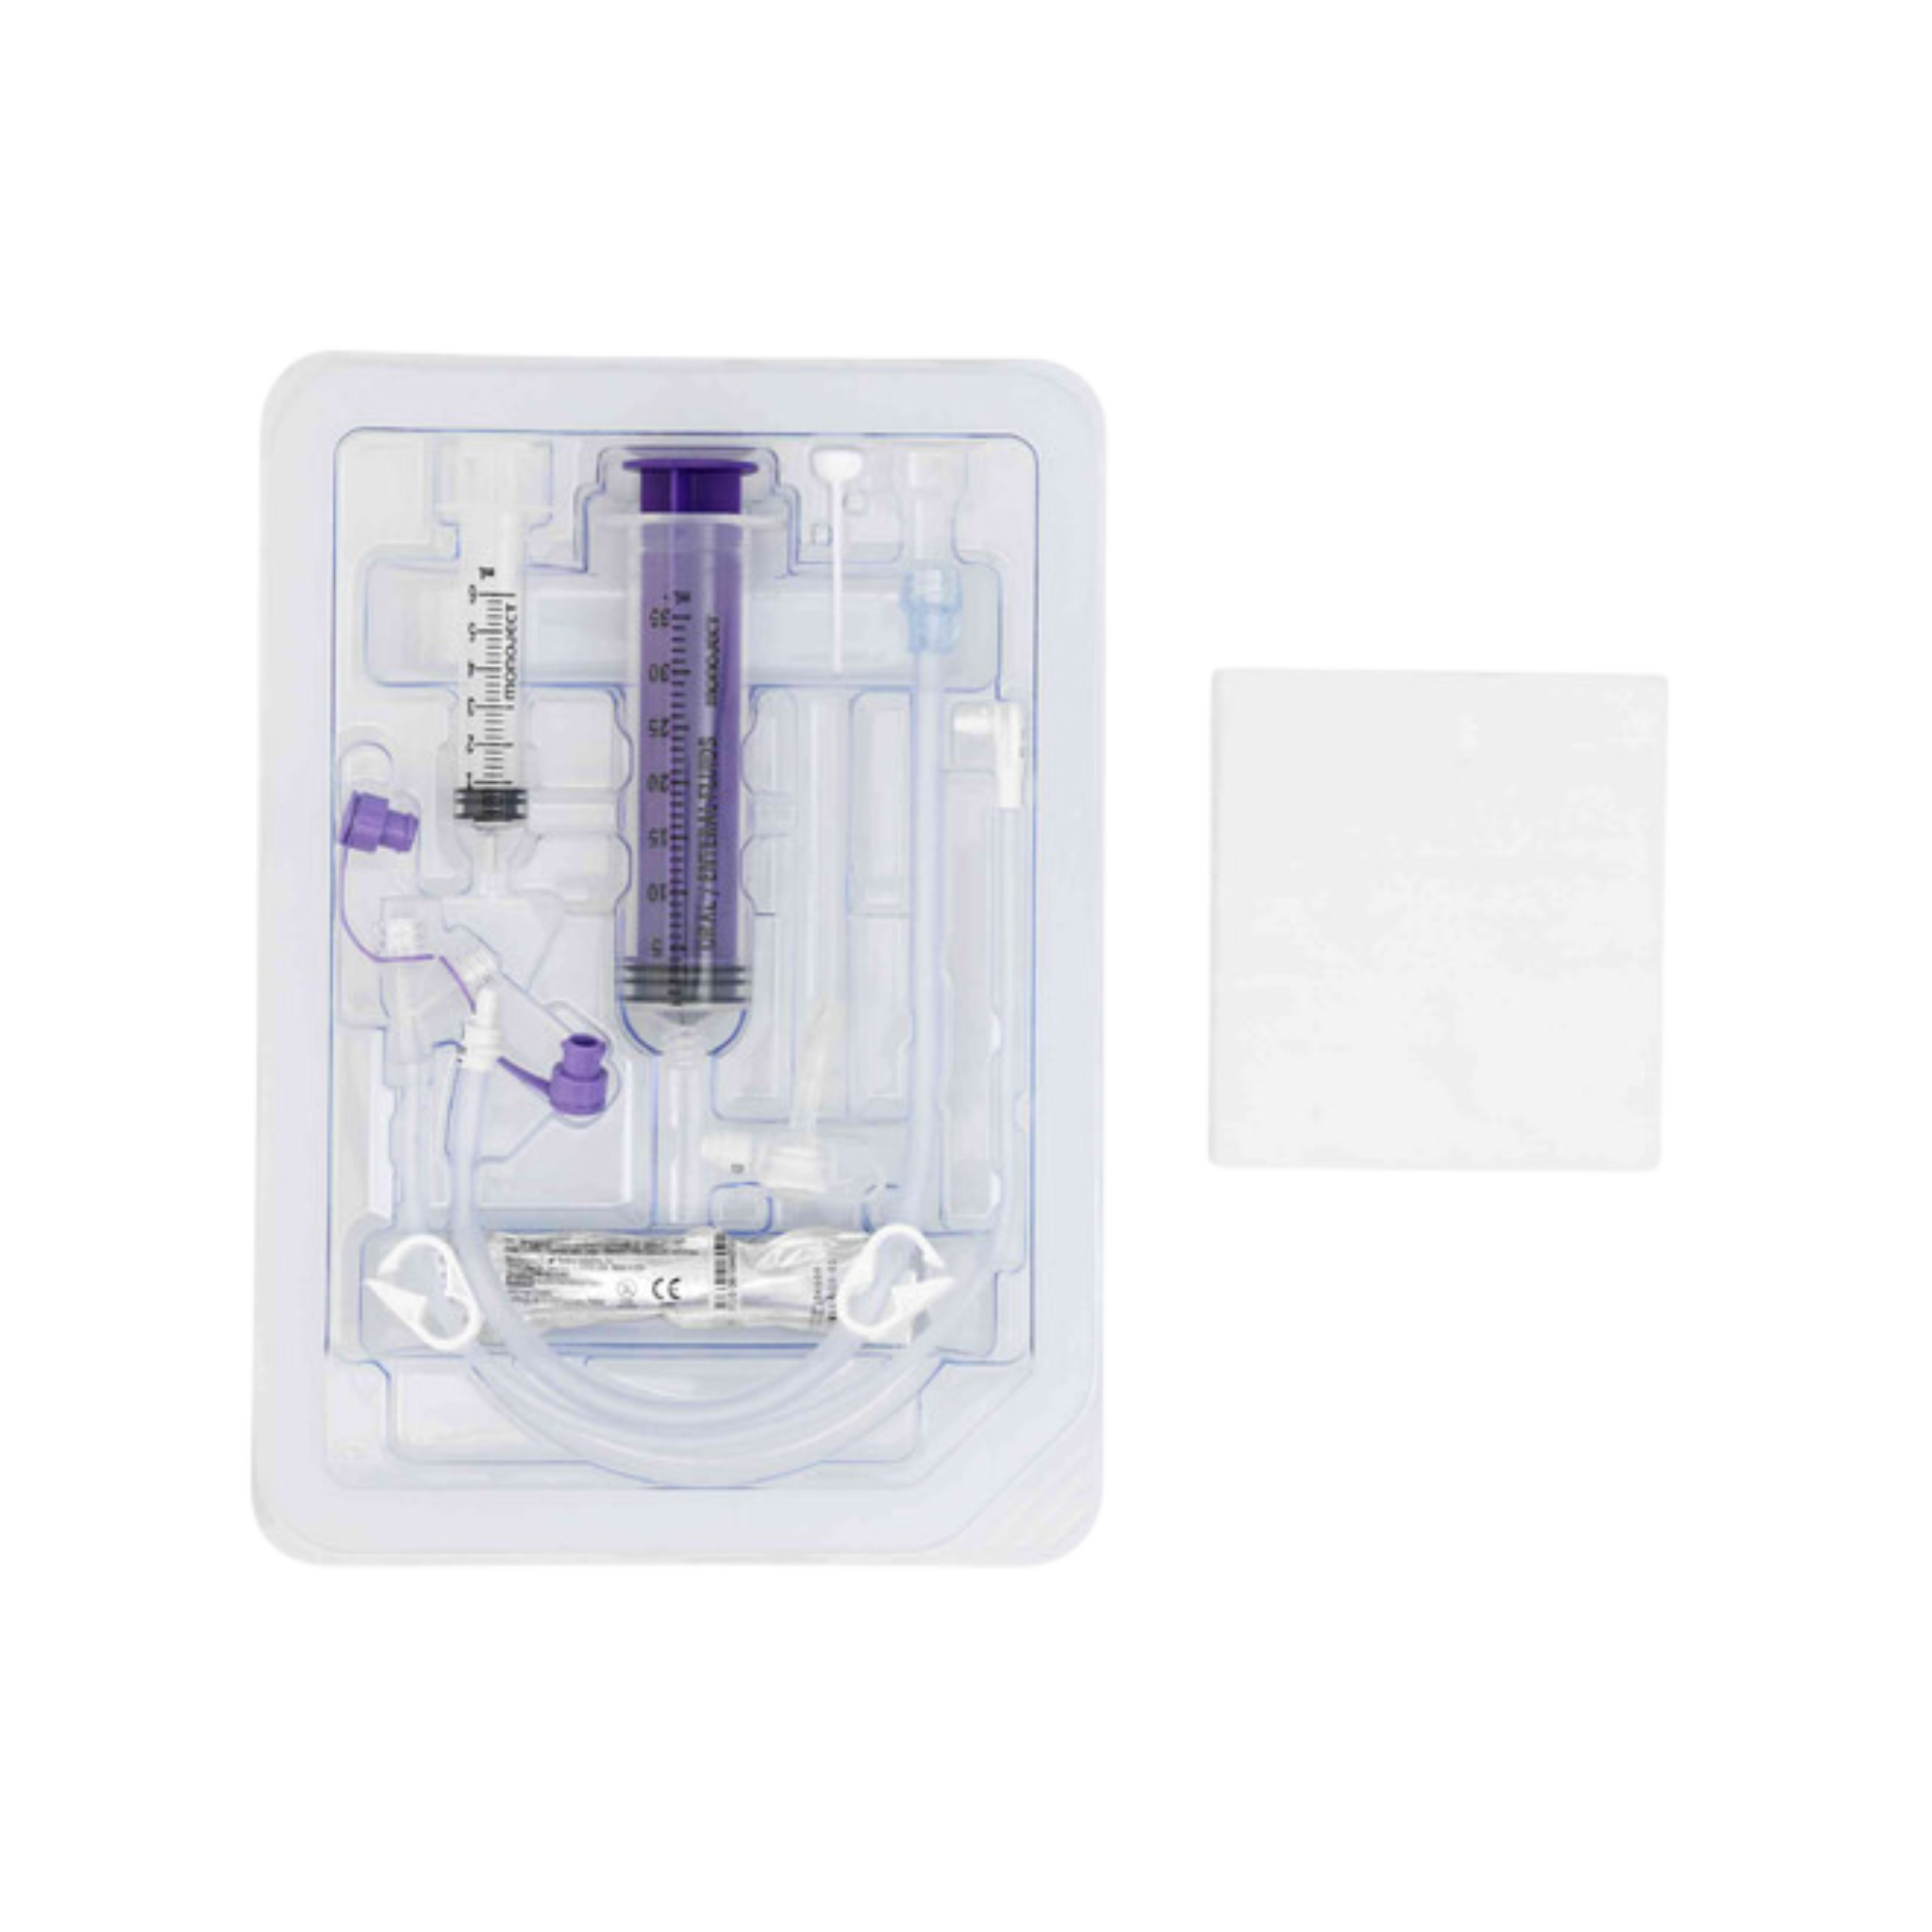 Avanos Mic-Key 20Fr Low-Profile Balloon Gastrostomy Feeding Tube Extension Sets With Enfit Connectors - All Lengths